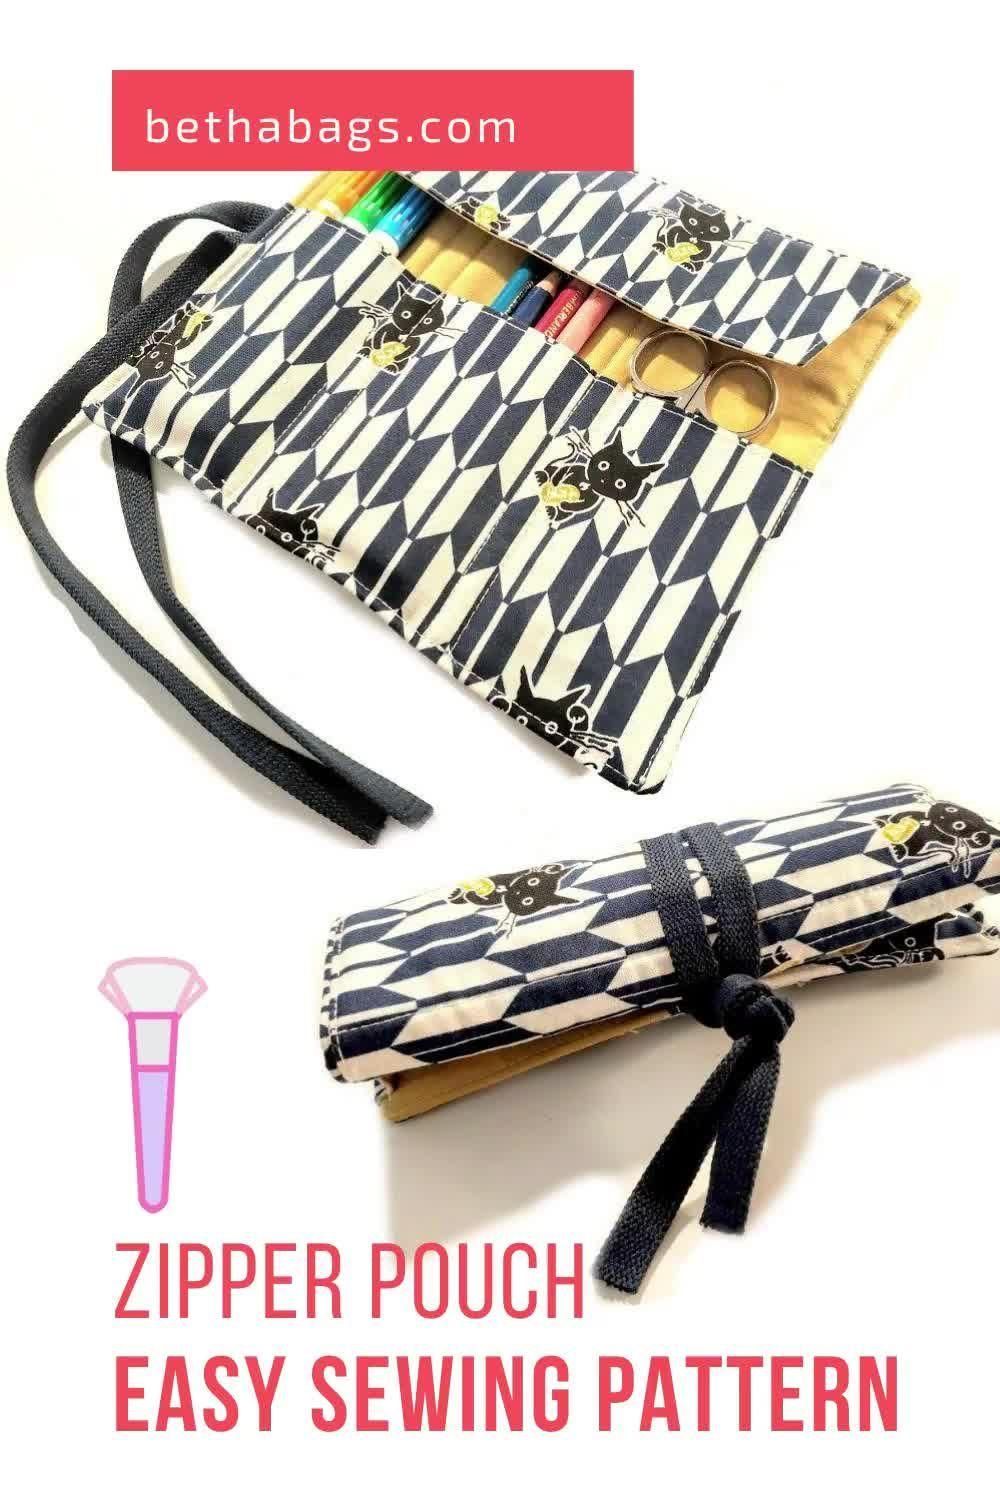 Roll Up Pencil Case Sewing Pattern PDF -   19 fabric crafts projects easy diy ideas